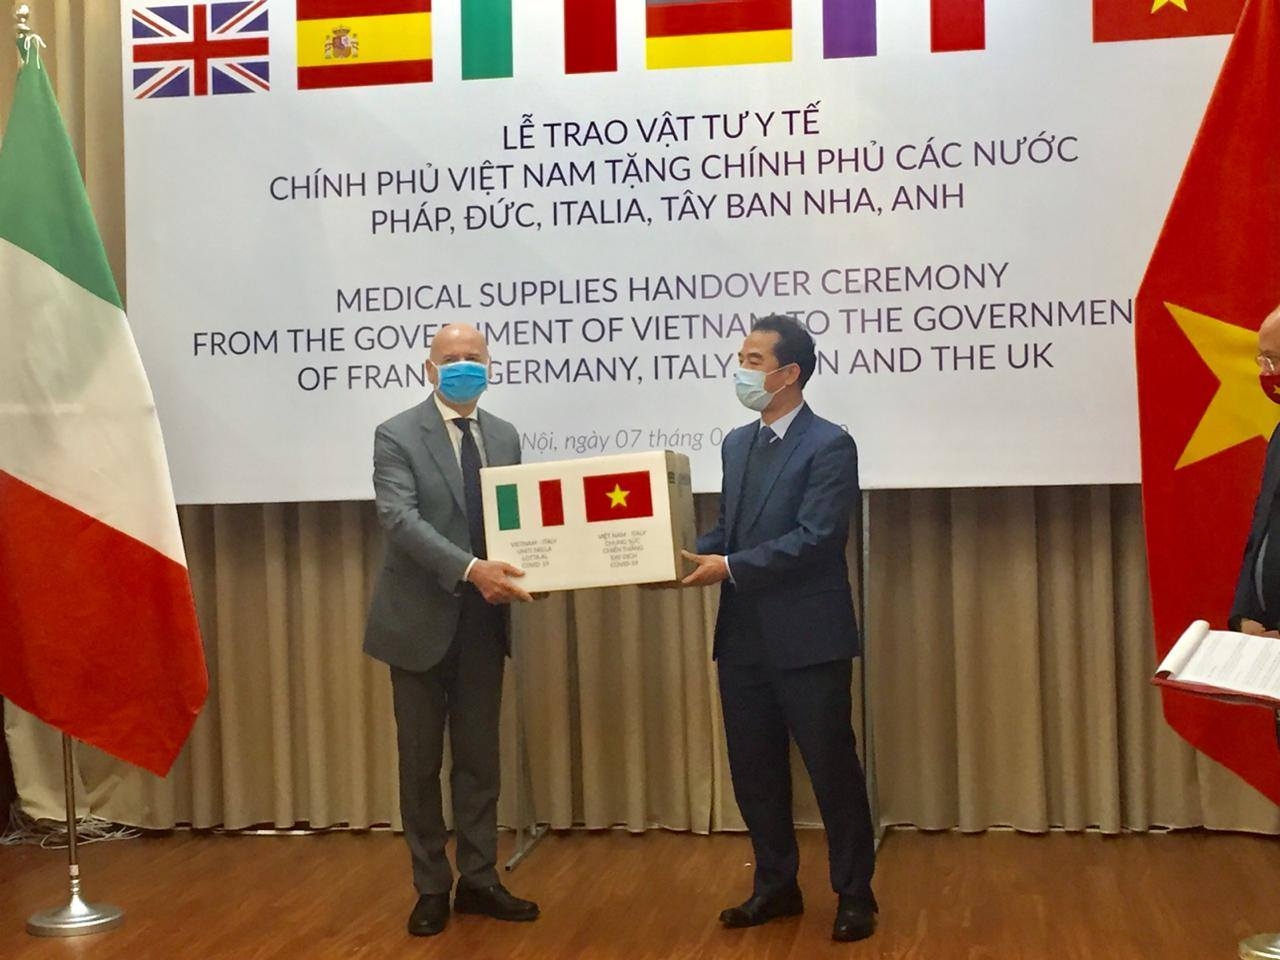 vietnam gifts 550000 face masks to uk france germany italy spain